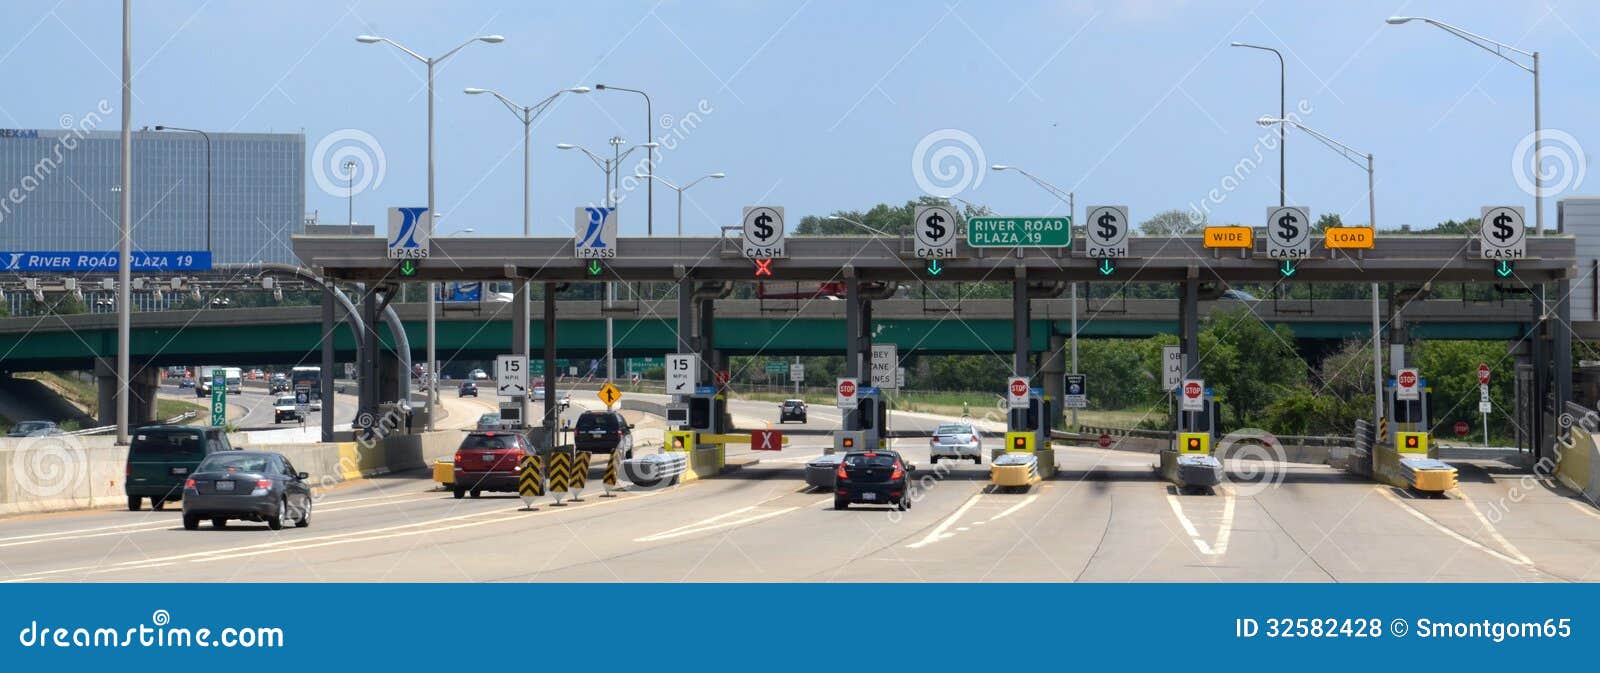 Toll Plaza At River Road, Near Chicago Editorial Stock